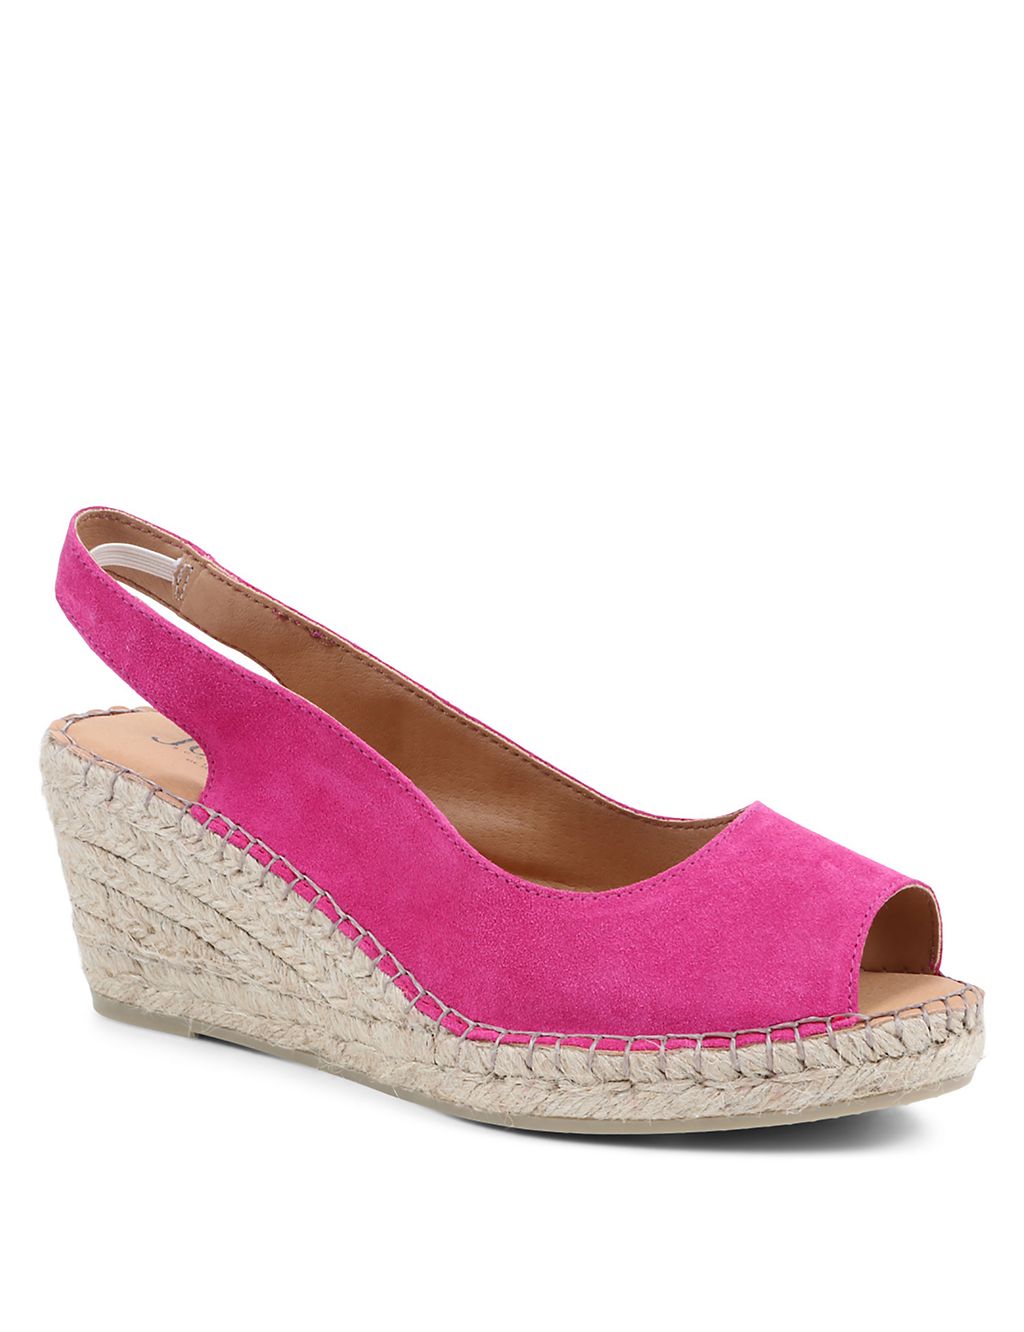 Suede Slingback Wedge Sandals 6 of 7